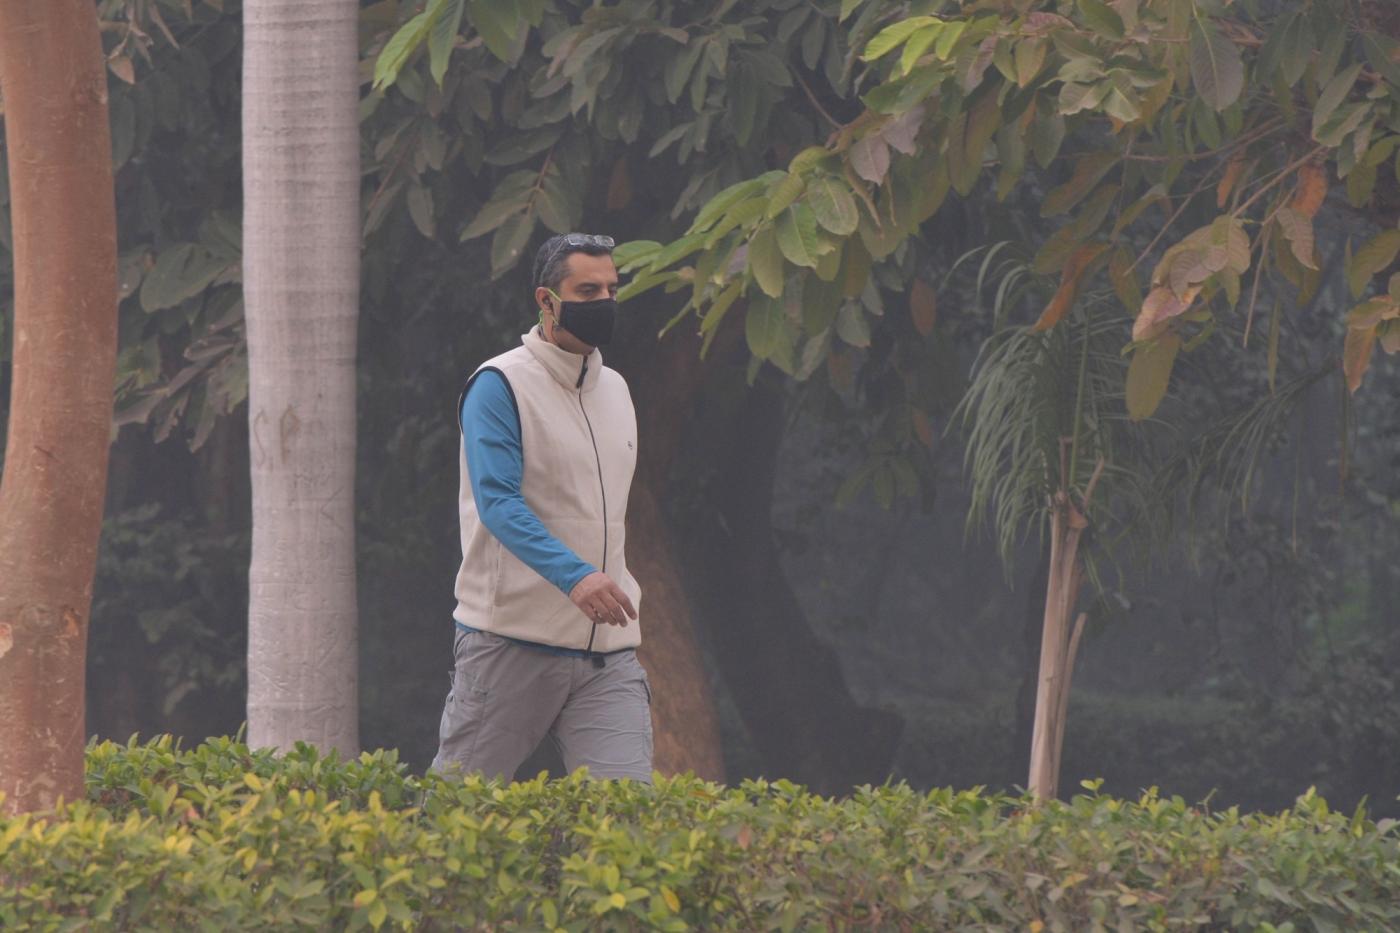 New Delhi: A man wears a mask to protect himself from pollution as smog engulfs New Delhi, on Nov 8, 2018. (Photo: IANS) by .